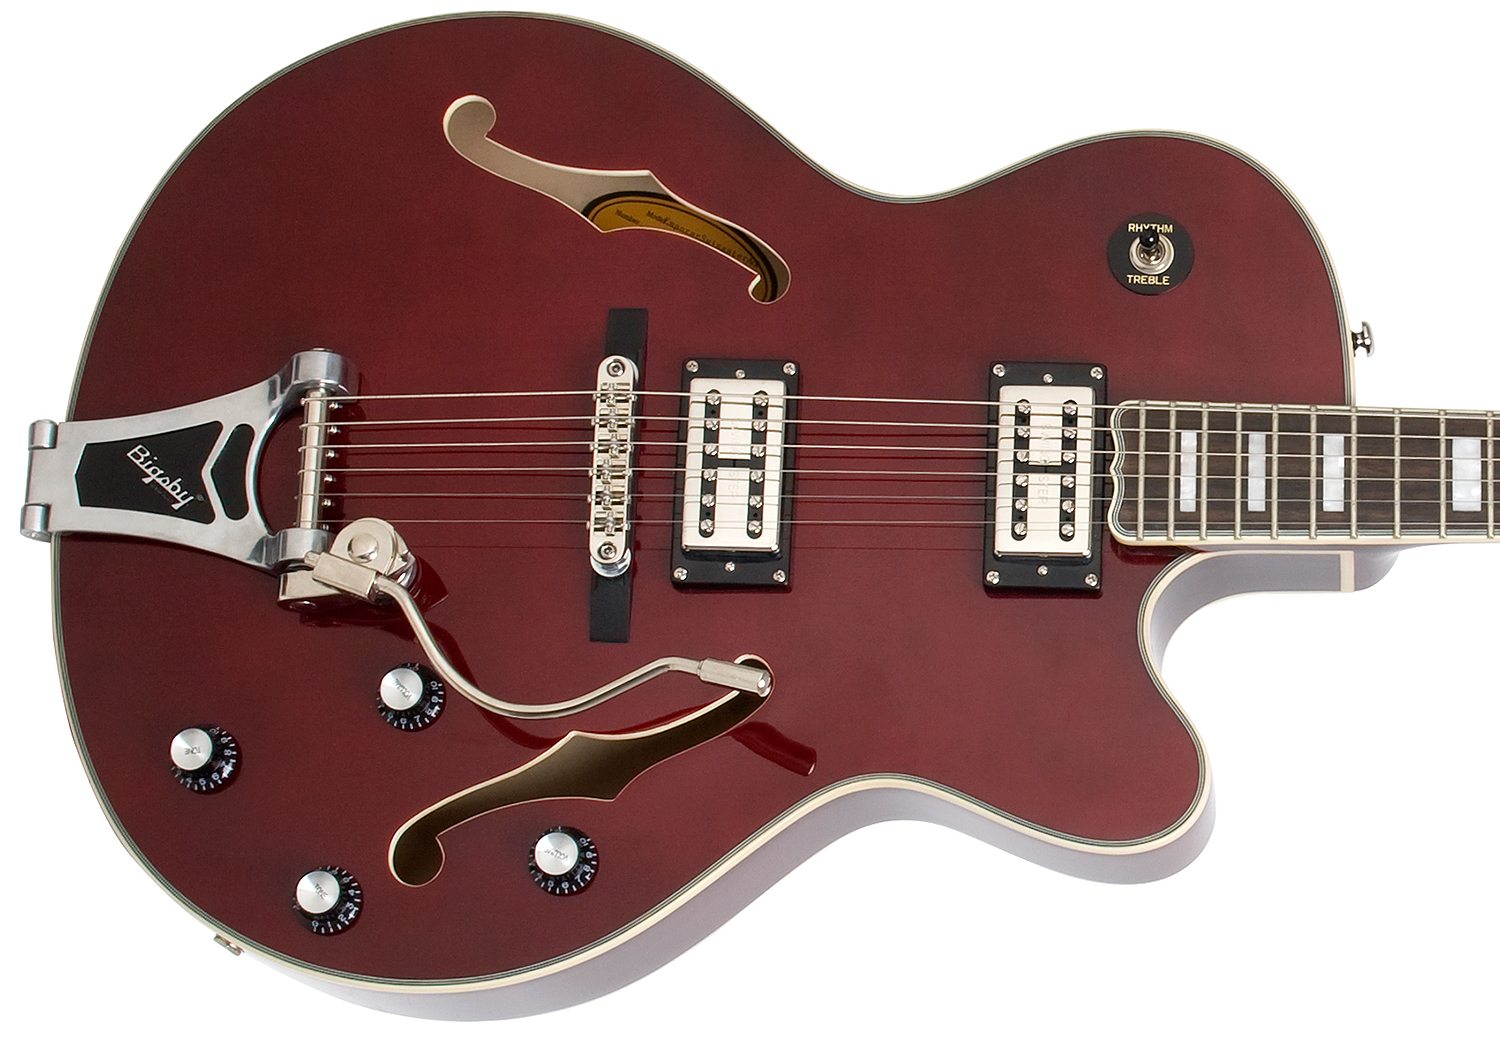 Epiphone Emperor Swingster Bigsby Gh - Wine Red - Hollow-body electric guitar - Variation 1